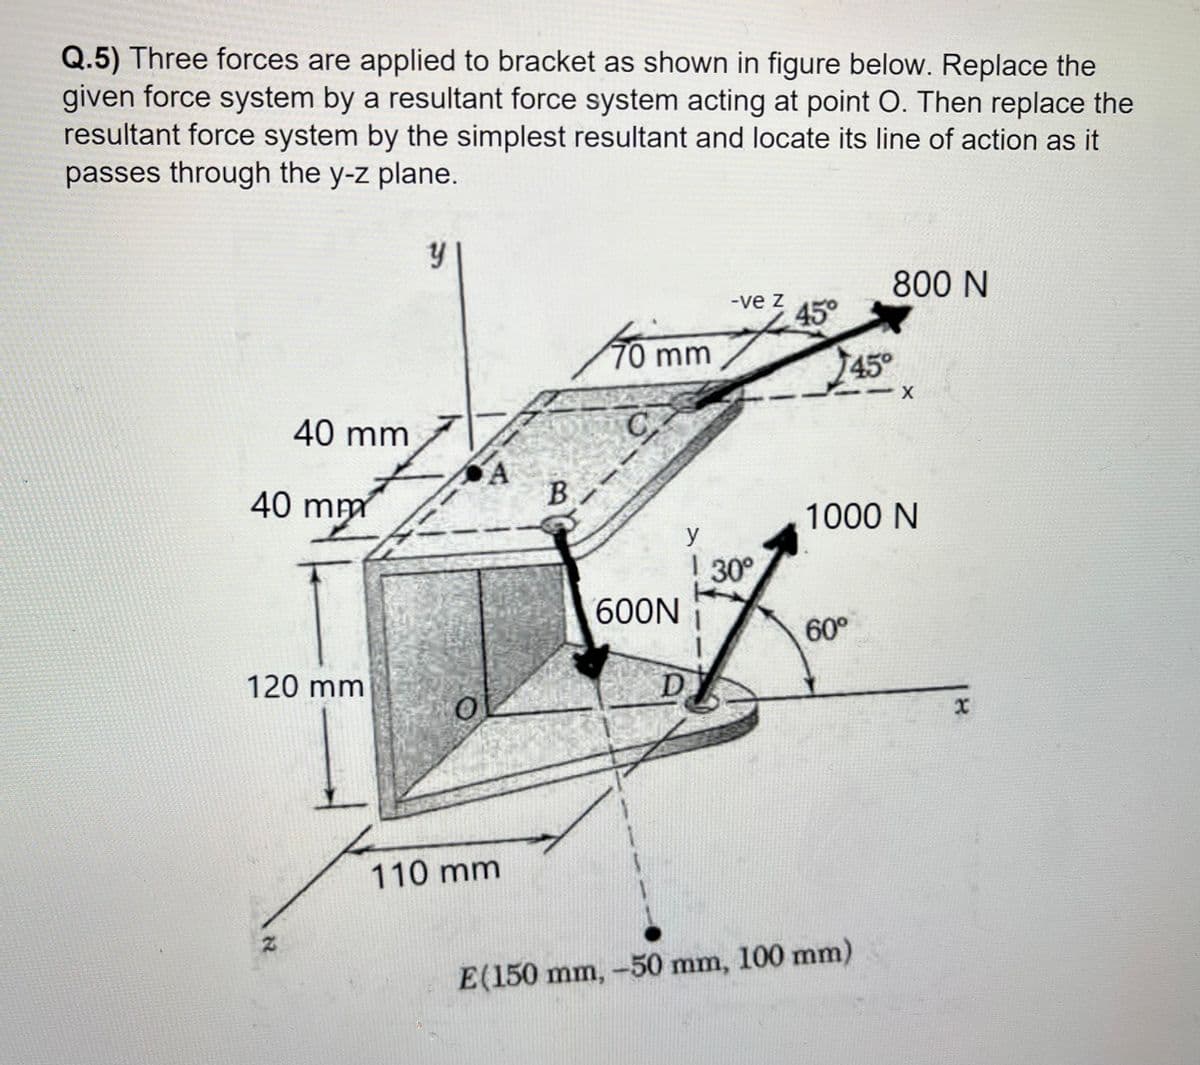 Q.5) Three forces are applied to bracket as shown in figure below. Replace the
given force system by a resultant force system acting at point O. Then replace the
resultant force system by the simplest resultant and locate its line of action as it
passes through the y-z plane.
y
800 N
-ve z
70 mm
40 mm
C
40 mm
120 mm
Z
245°
- X
1000 N
600N
60°
D
E(150 mm, -50 mm, 100 mm)
110 mm
B/
y
1
45°
30°
X